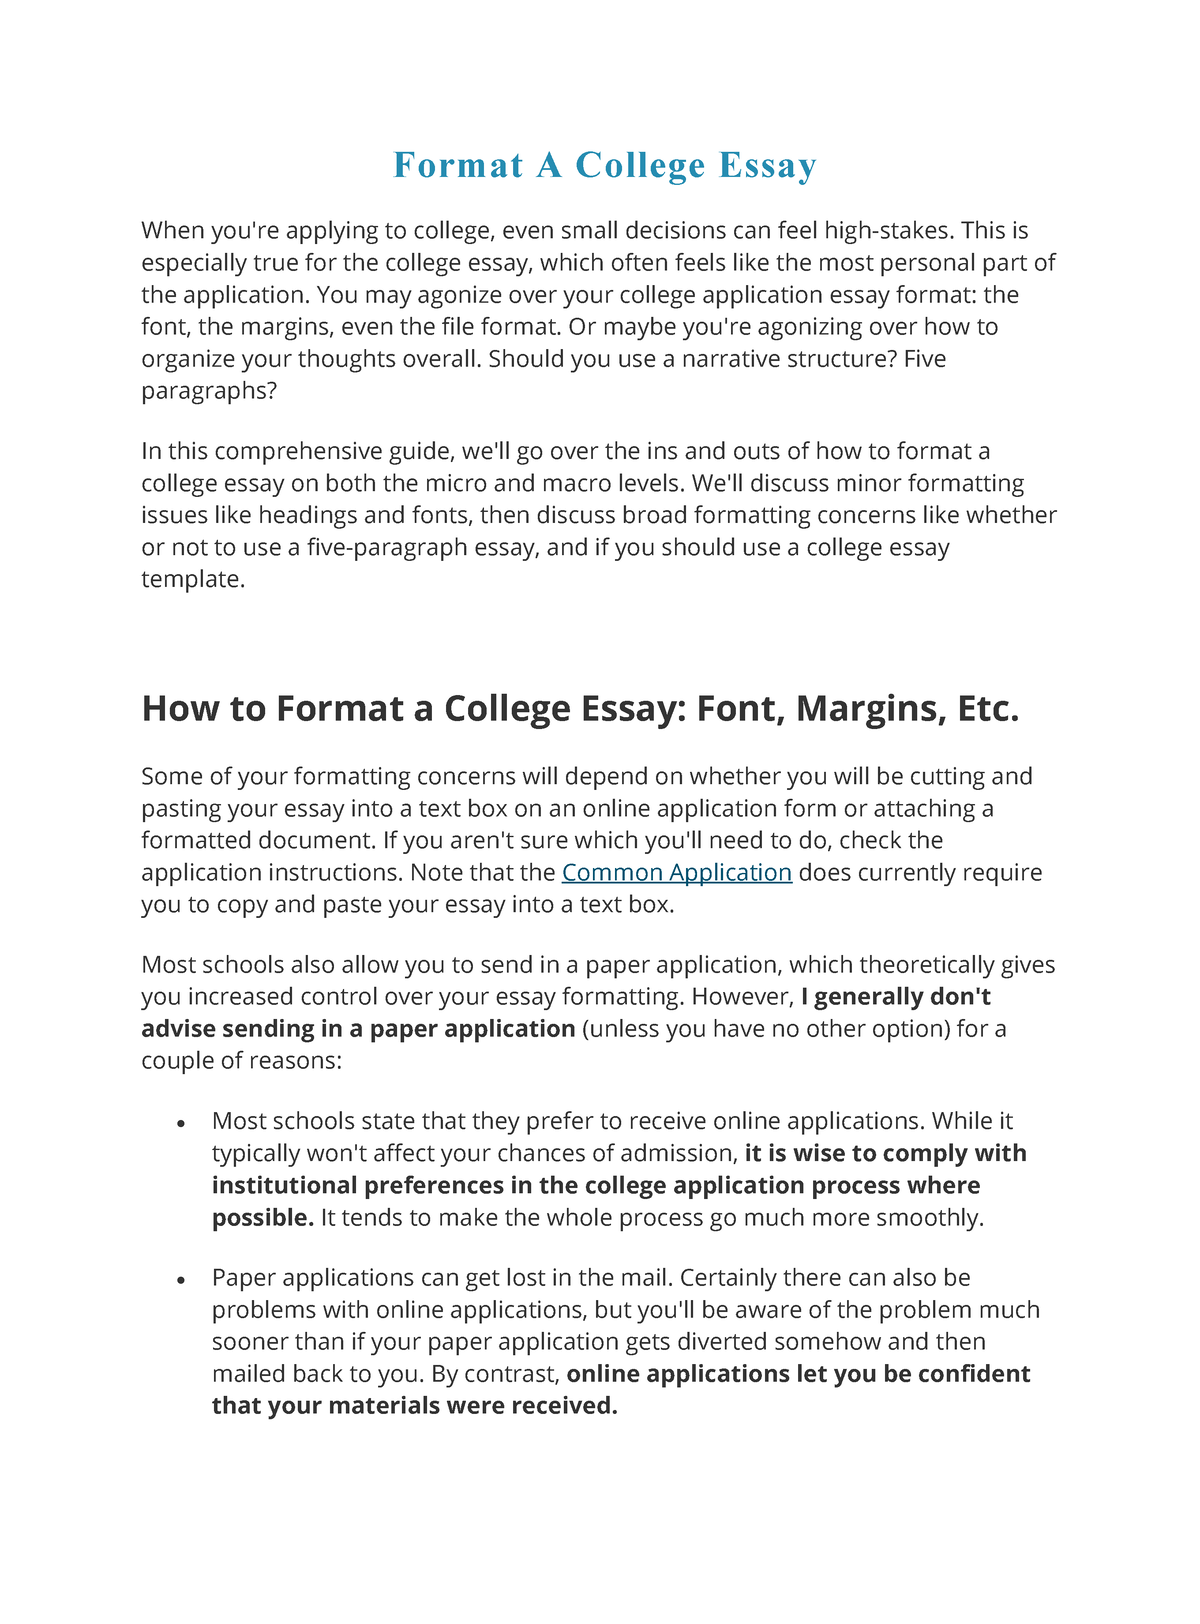 what font should a college essay be in